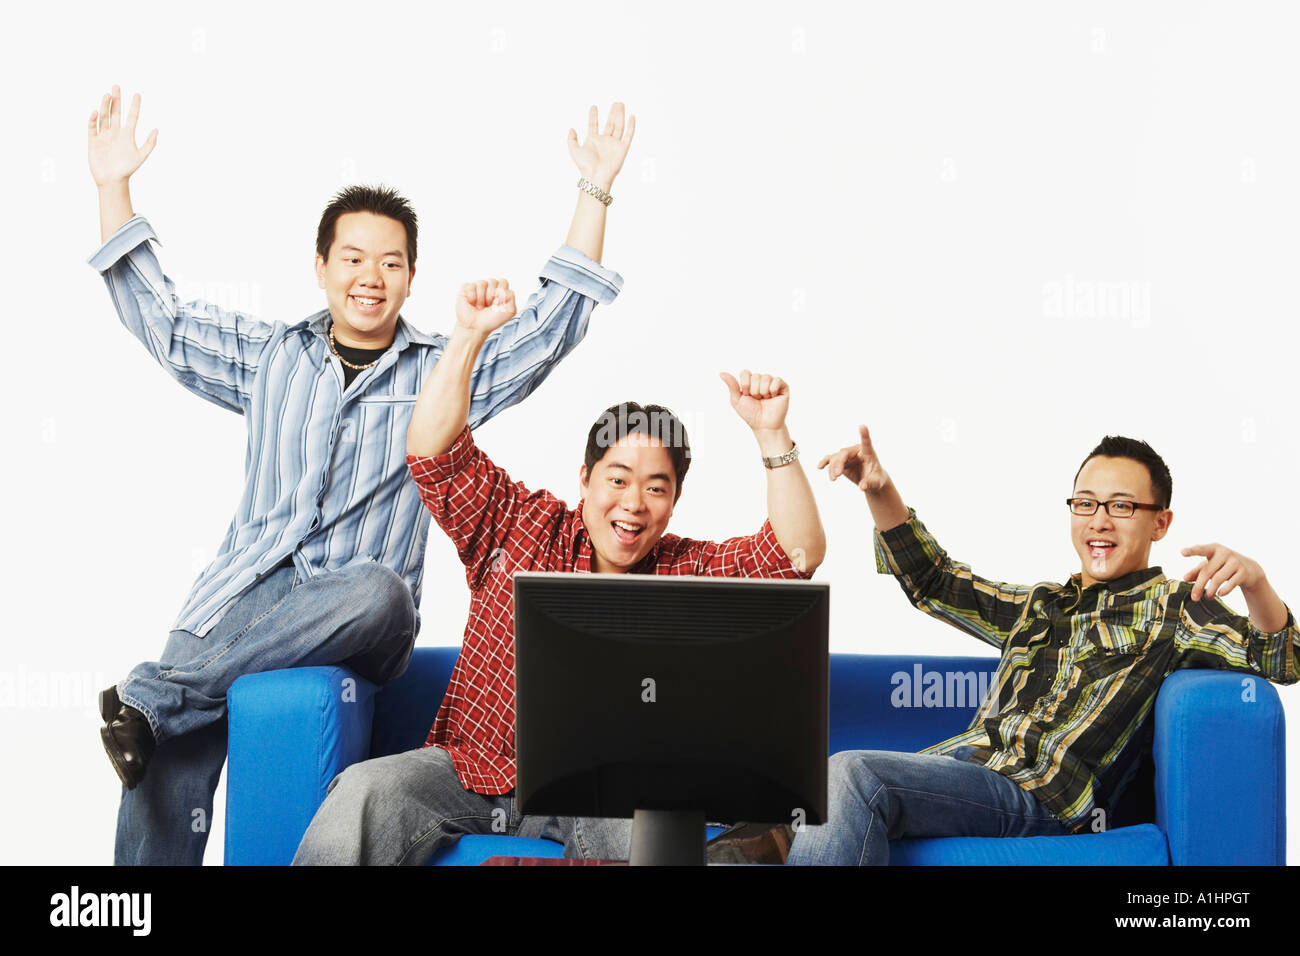 Close-up of three young men cheering in front of a flat screen monitor Stock Photo